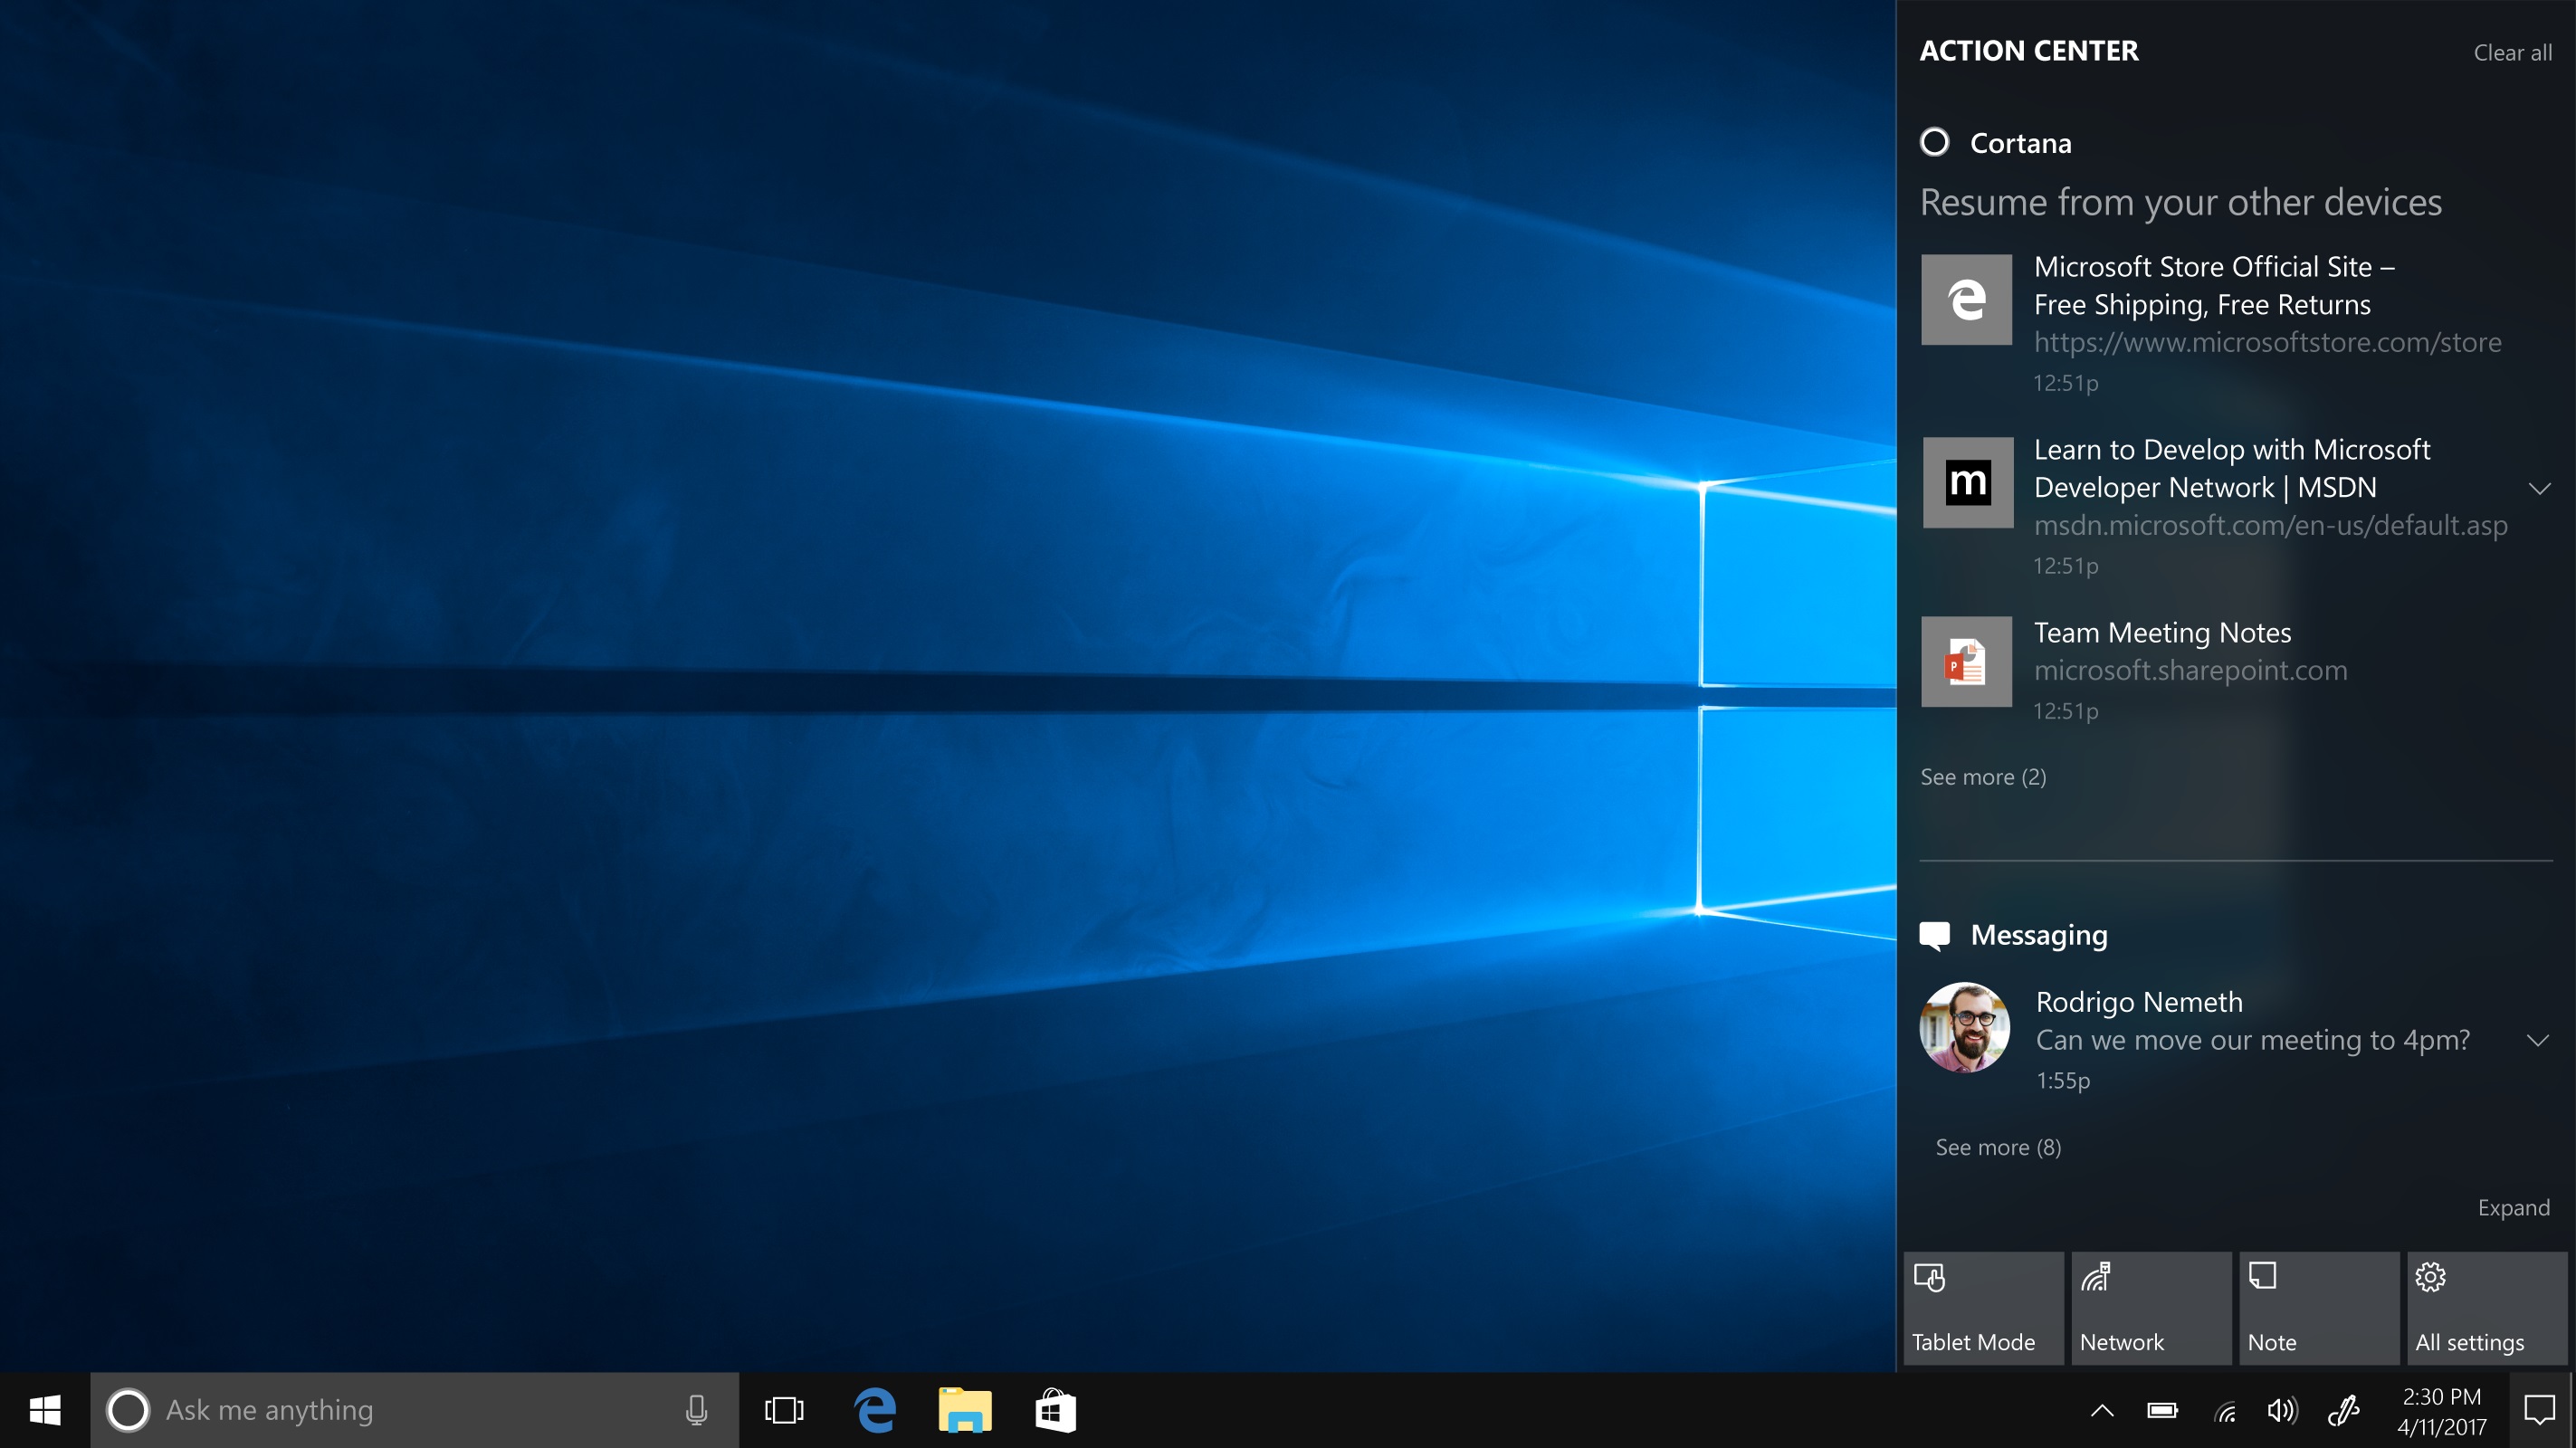 Cortana can help you pick up where you left off: When you switch computers, Cortana will display quick links in the Action Center to help you easily get back into Microsoft Edge websites and SharePoint (or other cloud-based) documents you used most recently. 